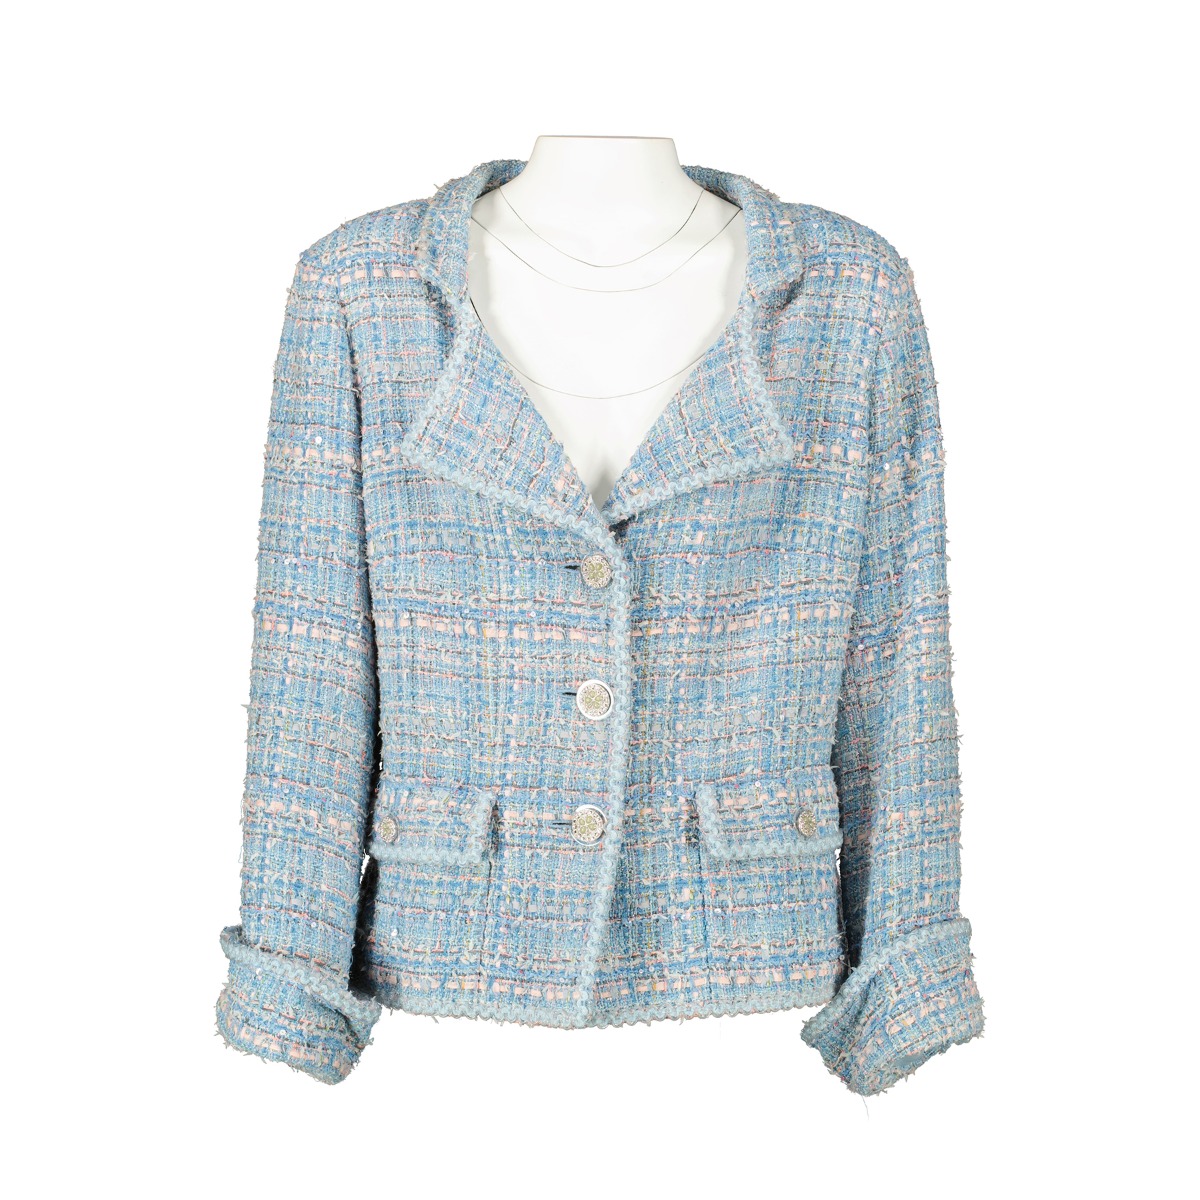 CHANEL BLUE PASTEL TWEED JACKET from ''Paris - Versailles'' Collection.  SIZE 38